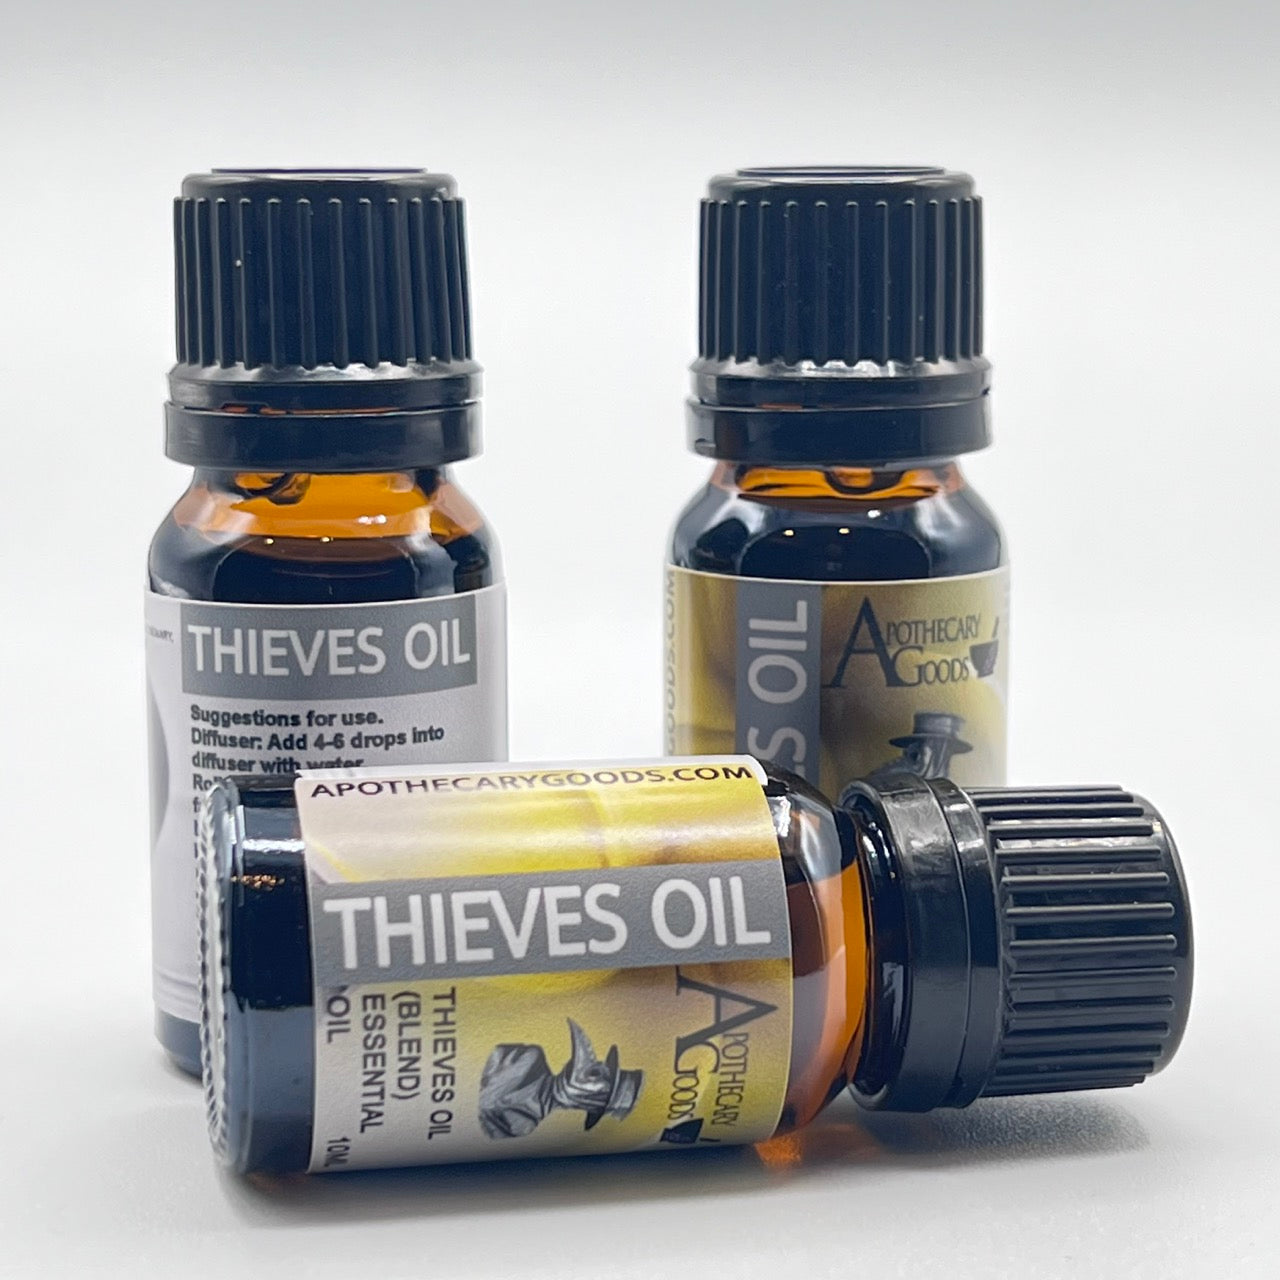 Thieves Oil Blend of Pure Essential Oils